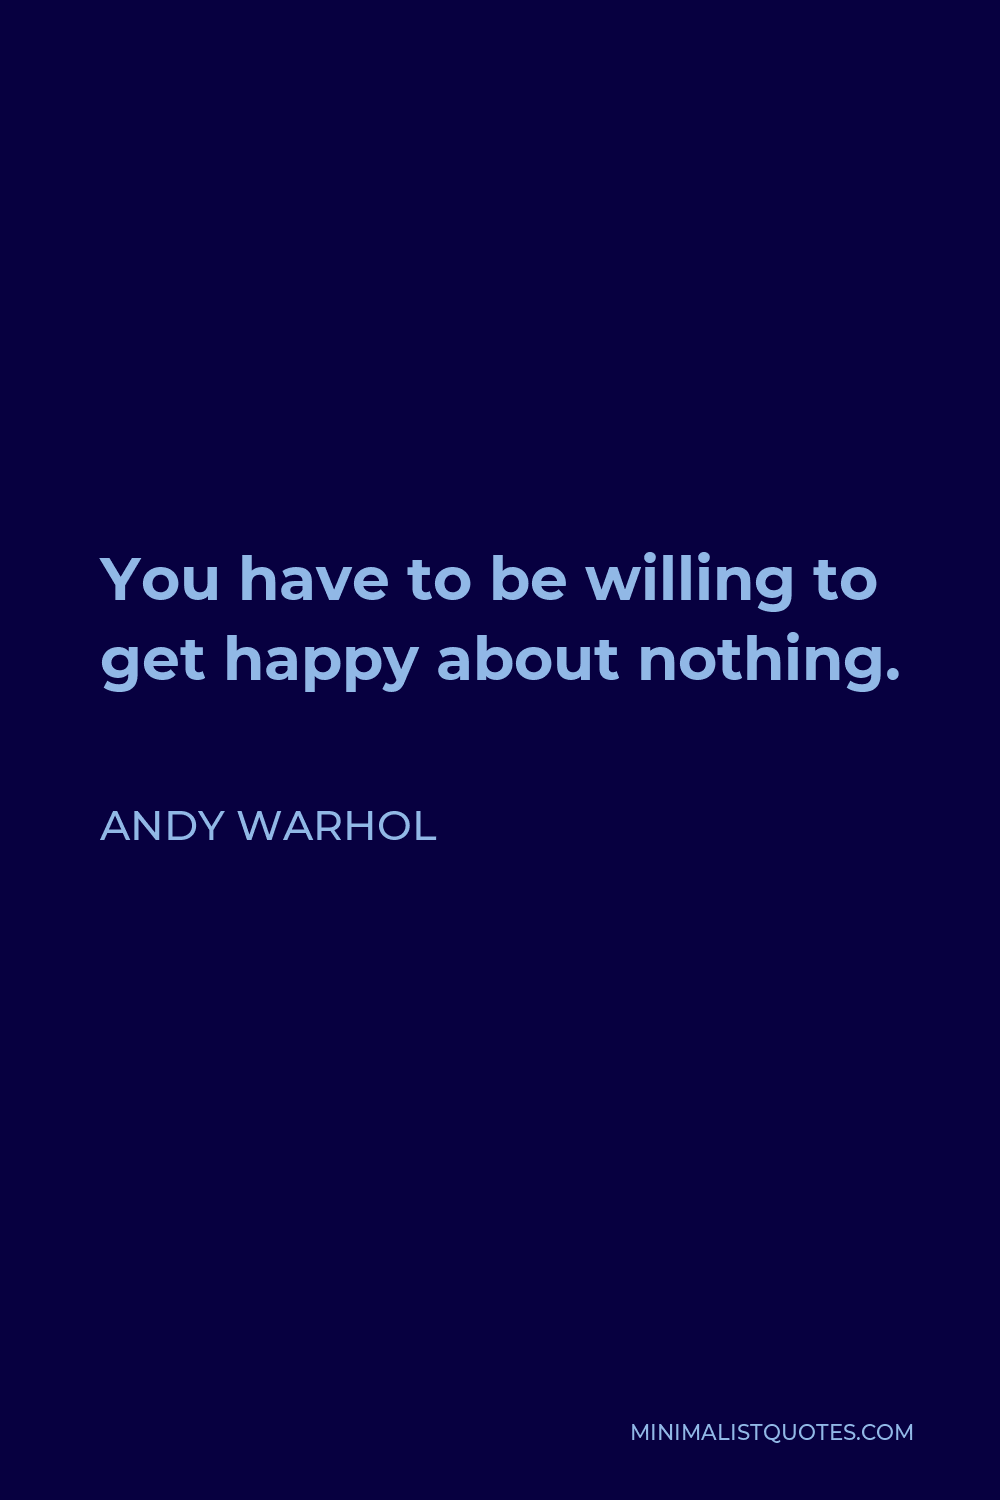 Andy Warhol Quote - You have to be willing to get happy about nothing.